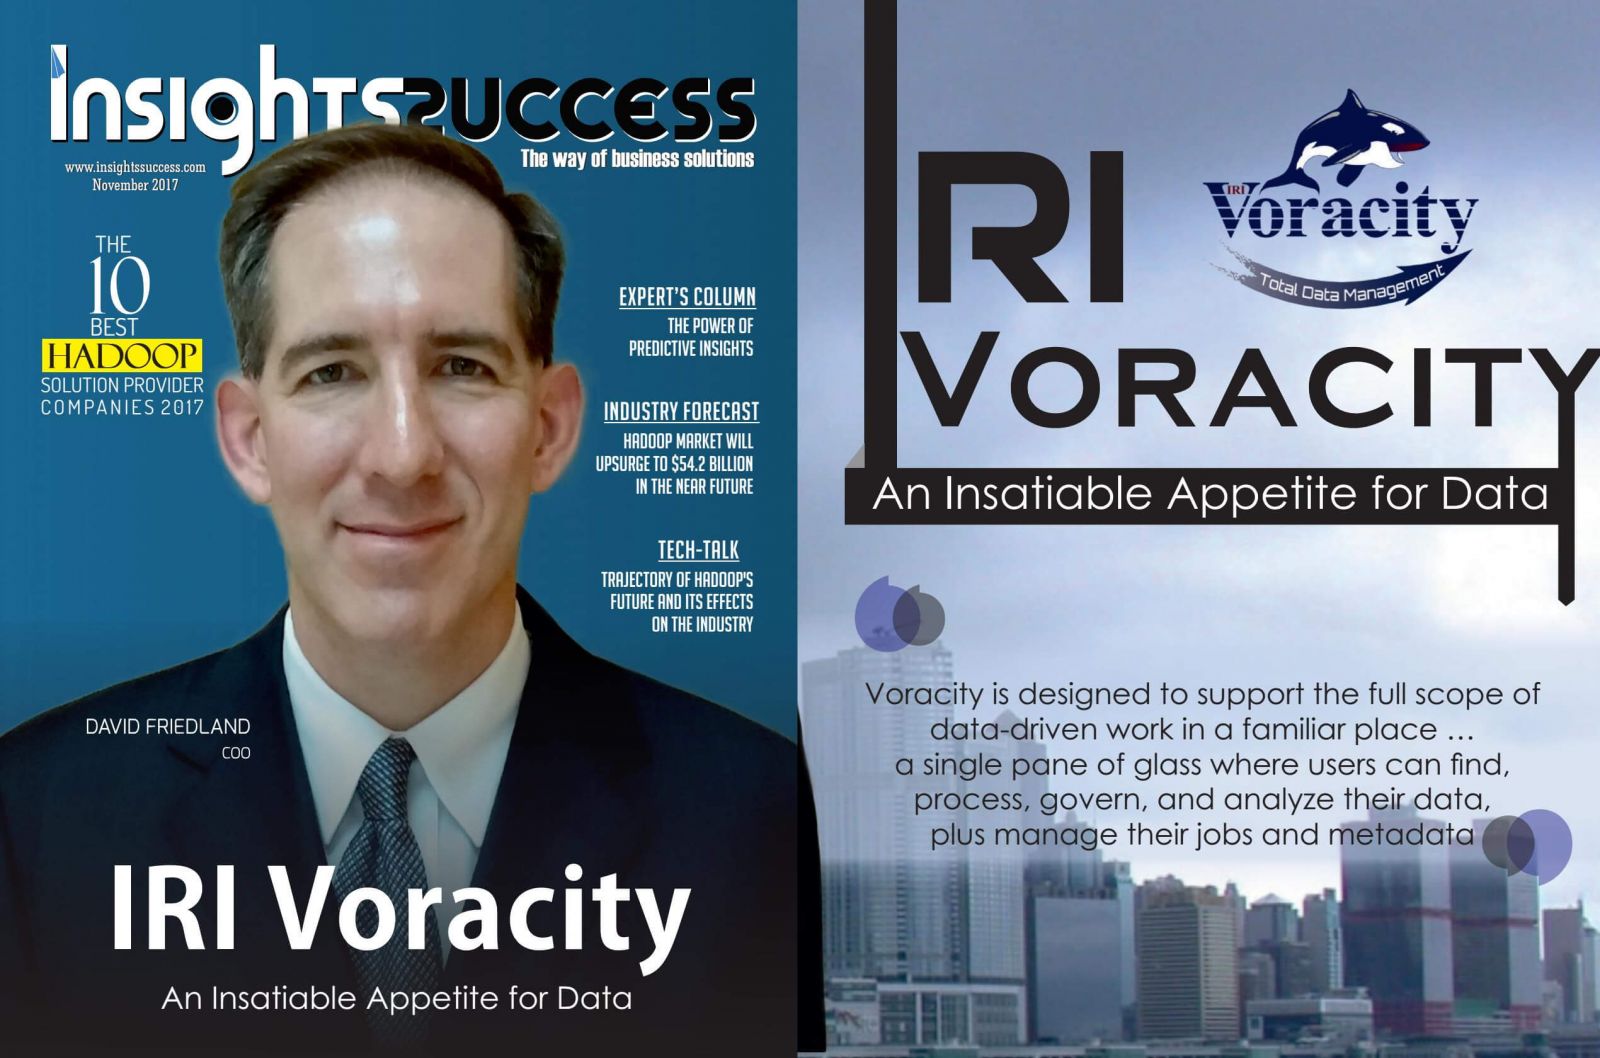 Voracity on the cover of Insights Success